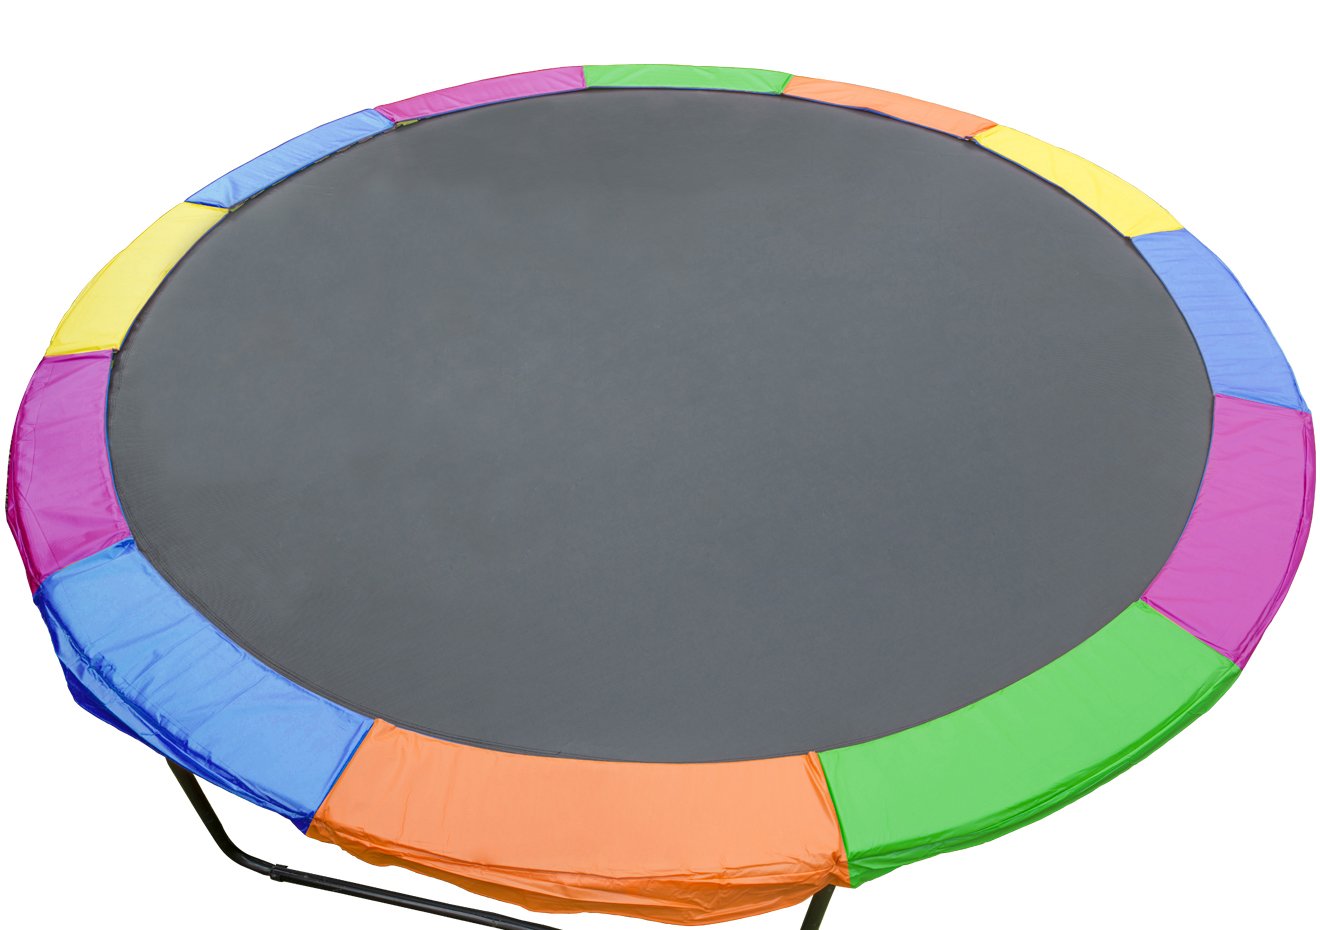 Replacement Trampoline Pad Reinforced Outdoor Round Spring Cover 14ft 1